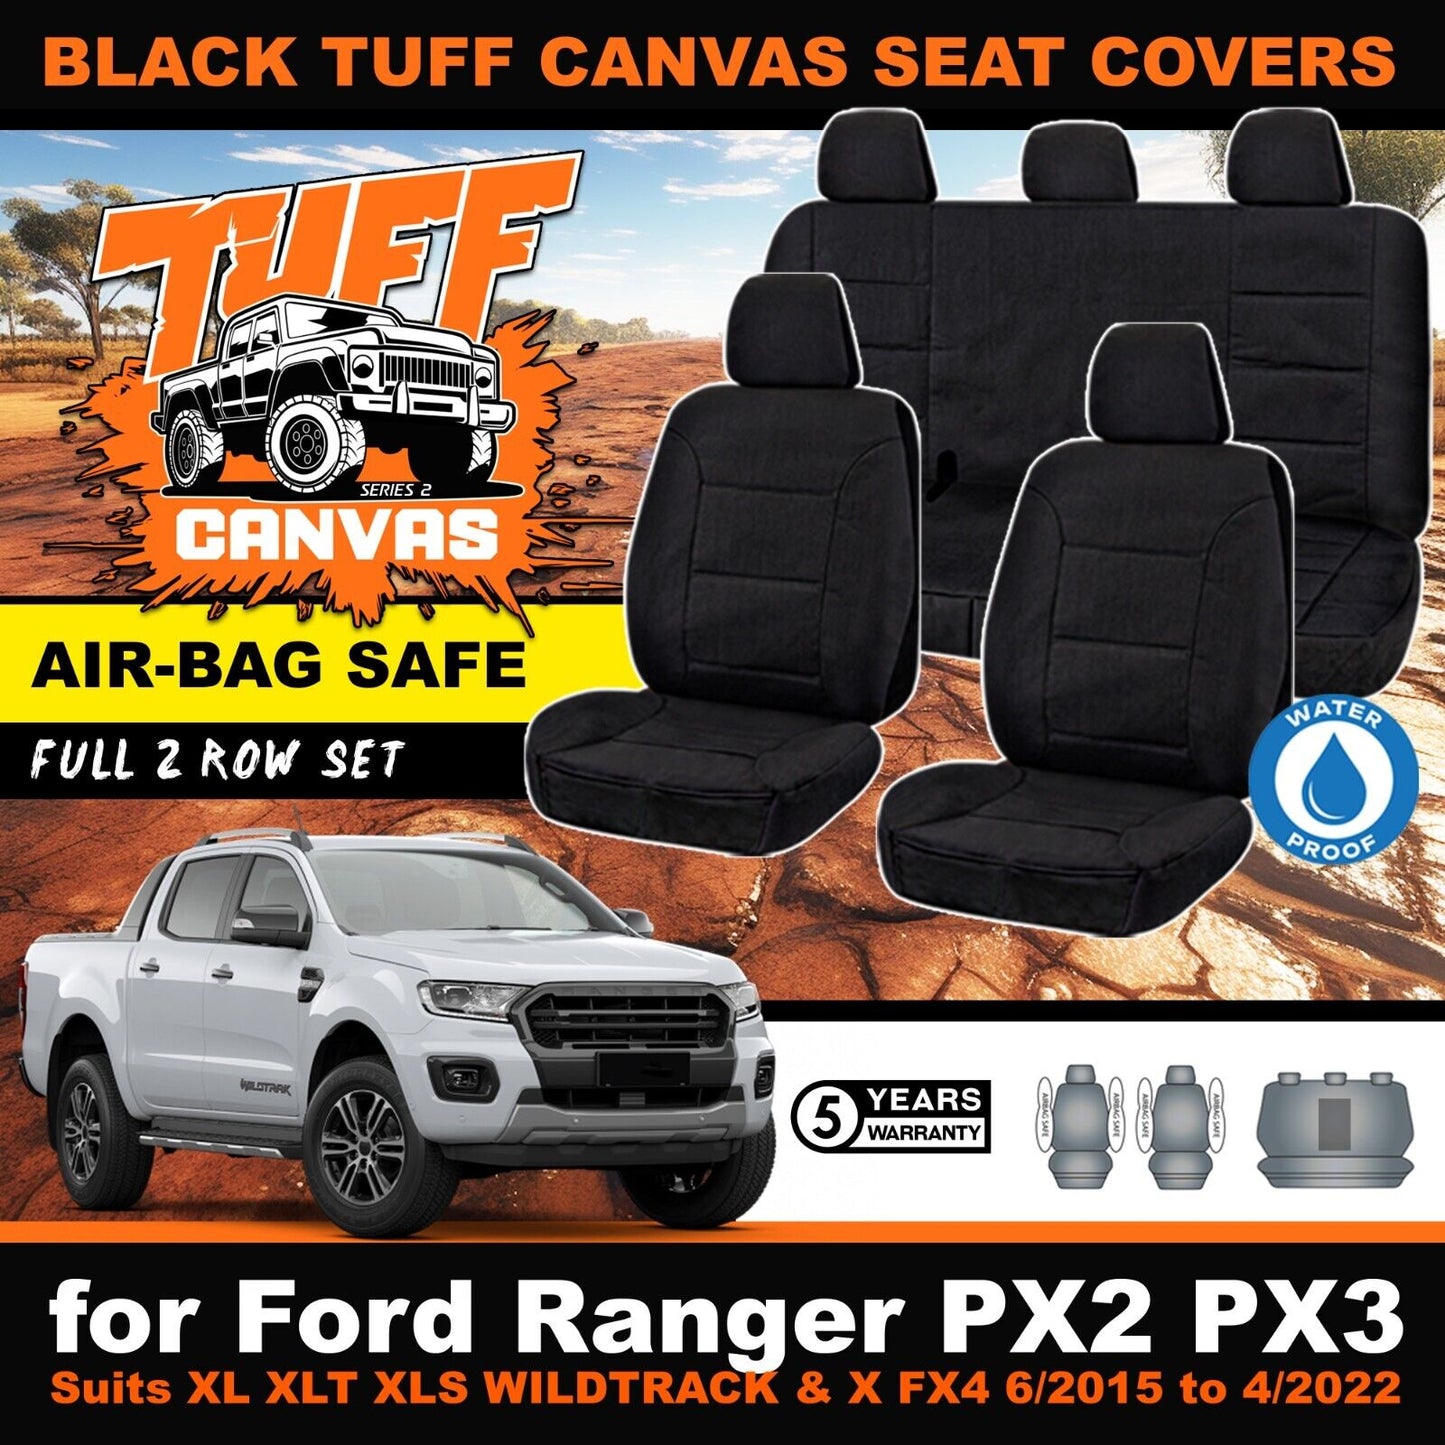 Black Tuff Canvas S2 Seat Covers 2 Rows For Ford Ranger PX2 PX3 Dual Cab XL XLT 6/2015-4/2022